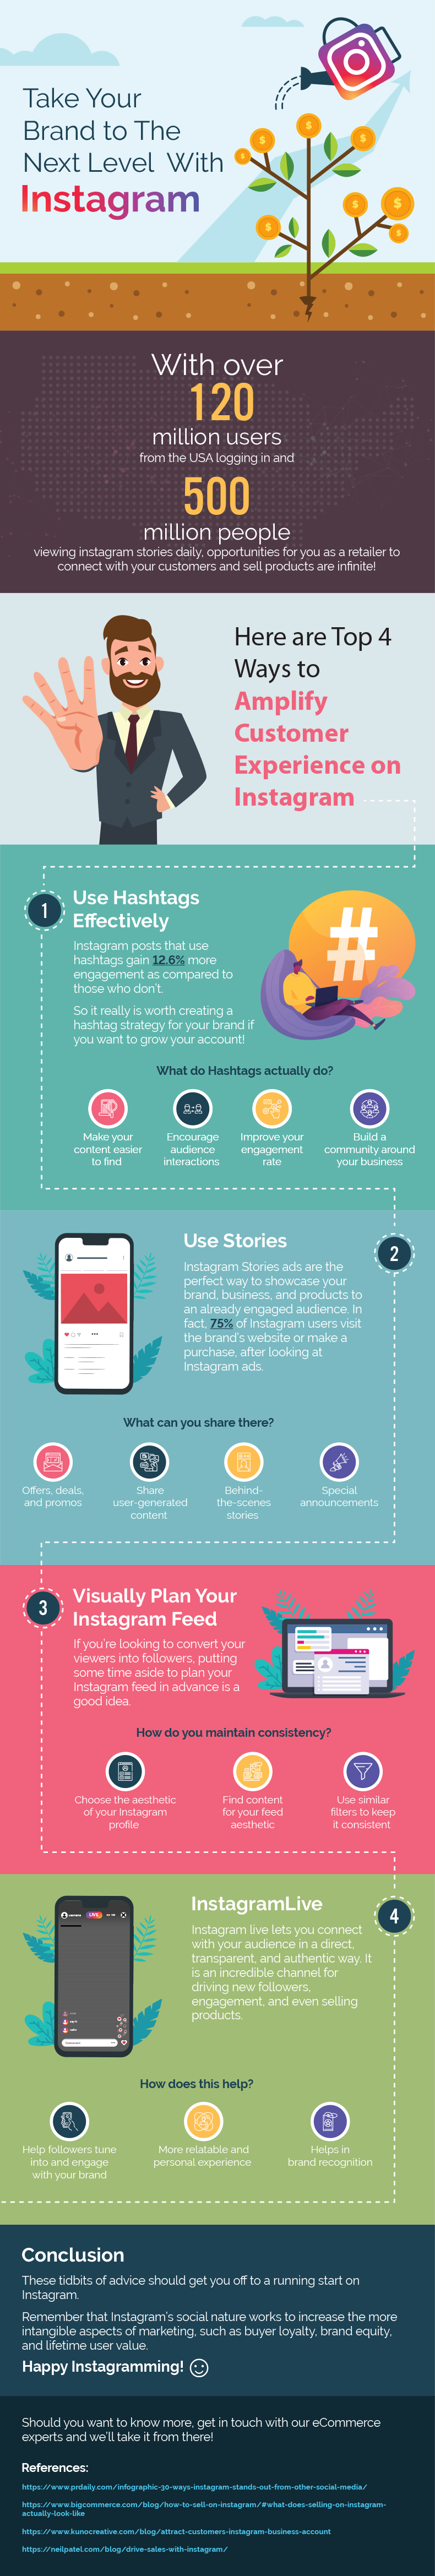 4 ways to amplify your customer experience on instagram in 2021 infographic